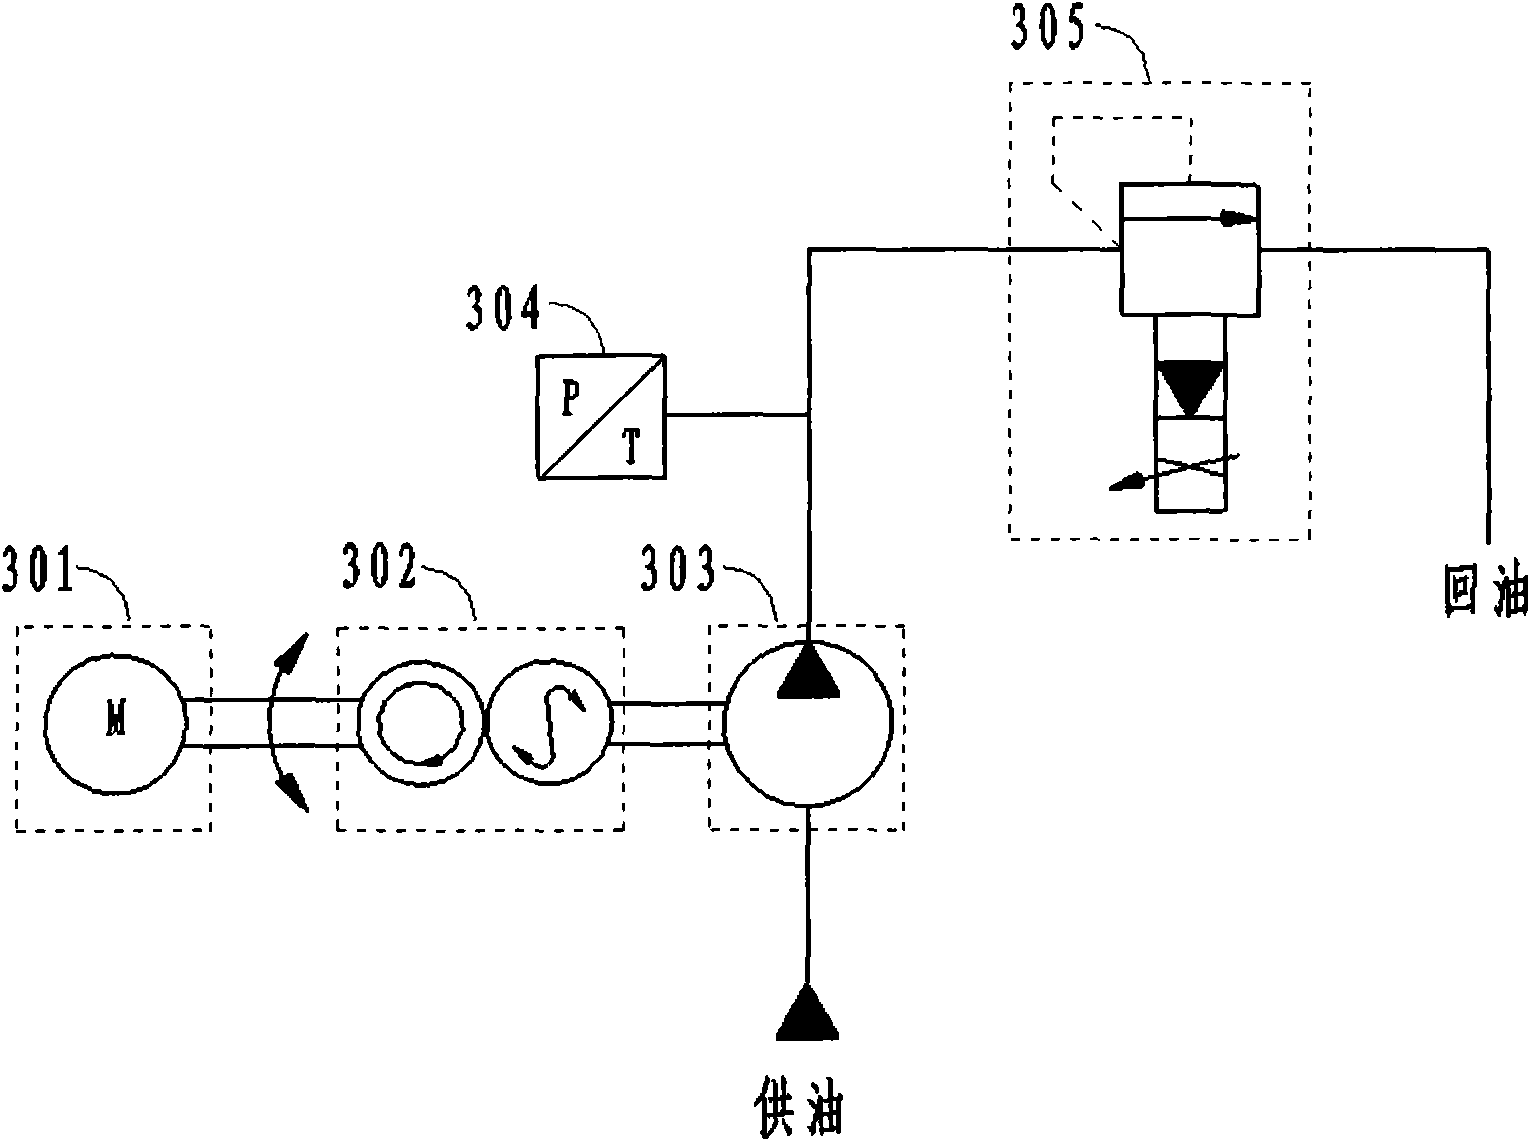 Model-based method for electro-hydraulic proportional loading